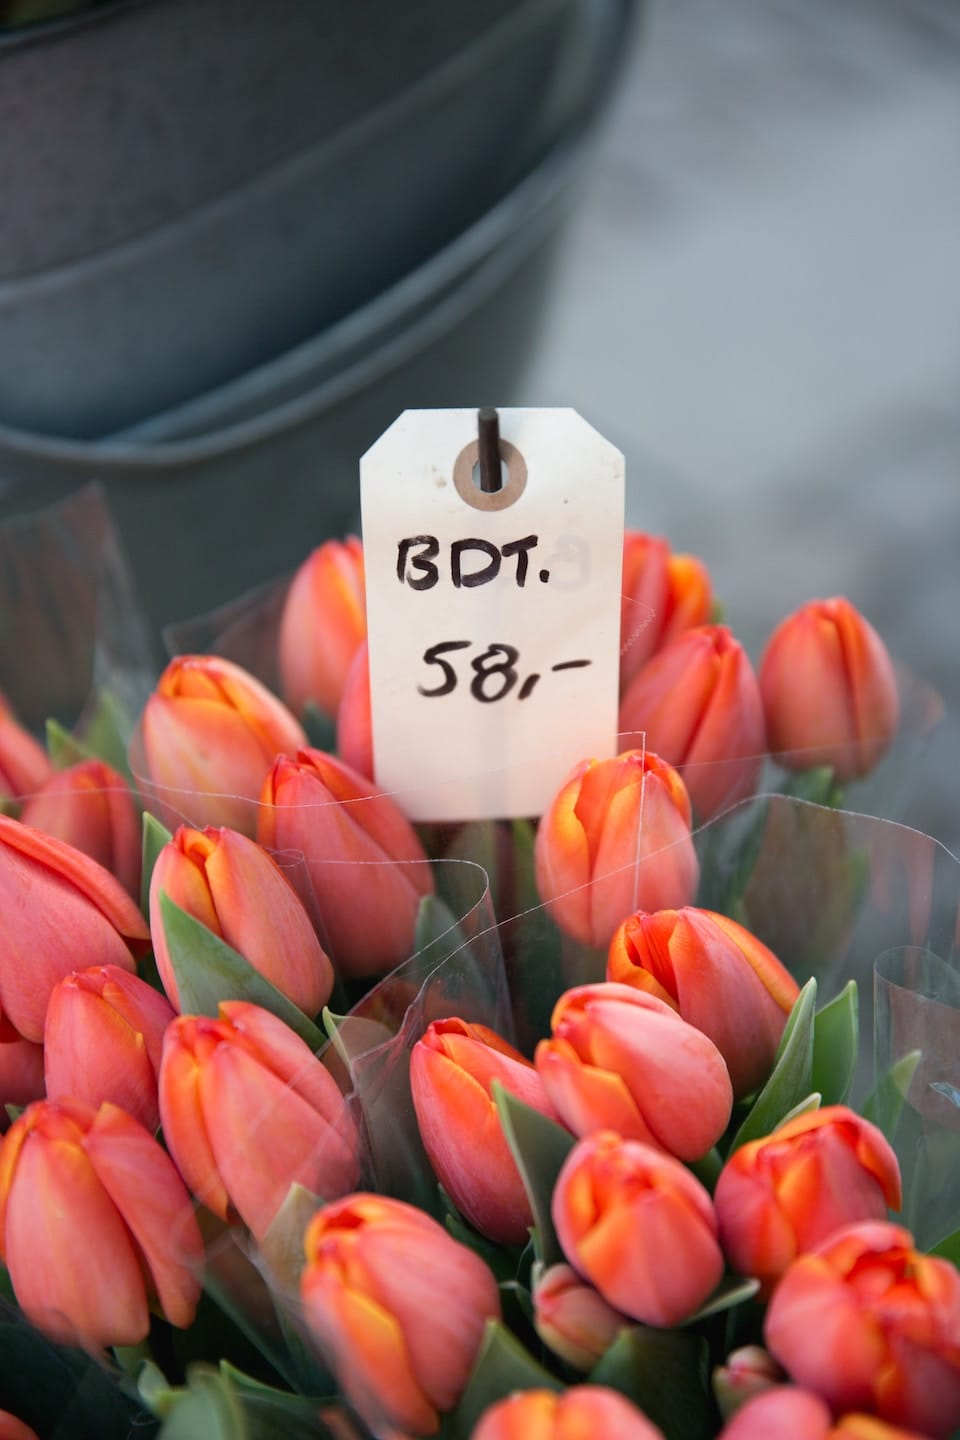 Flowers with pricetag